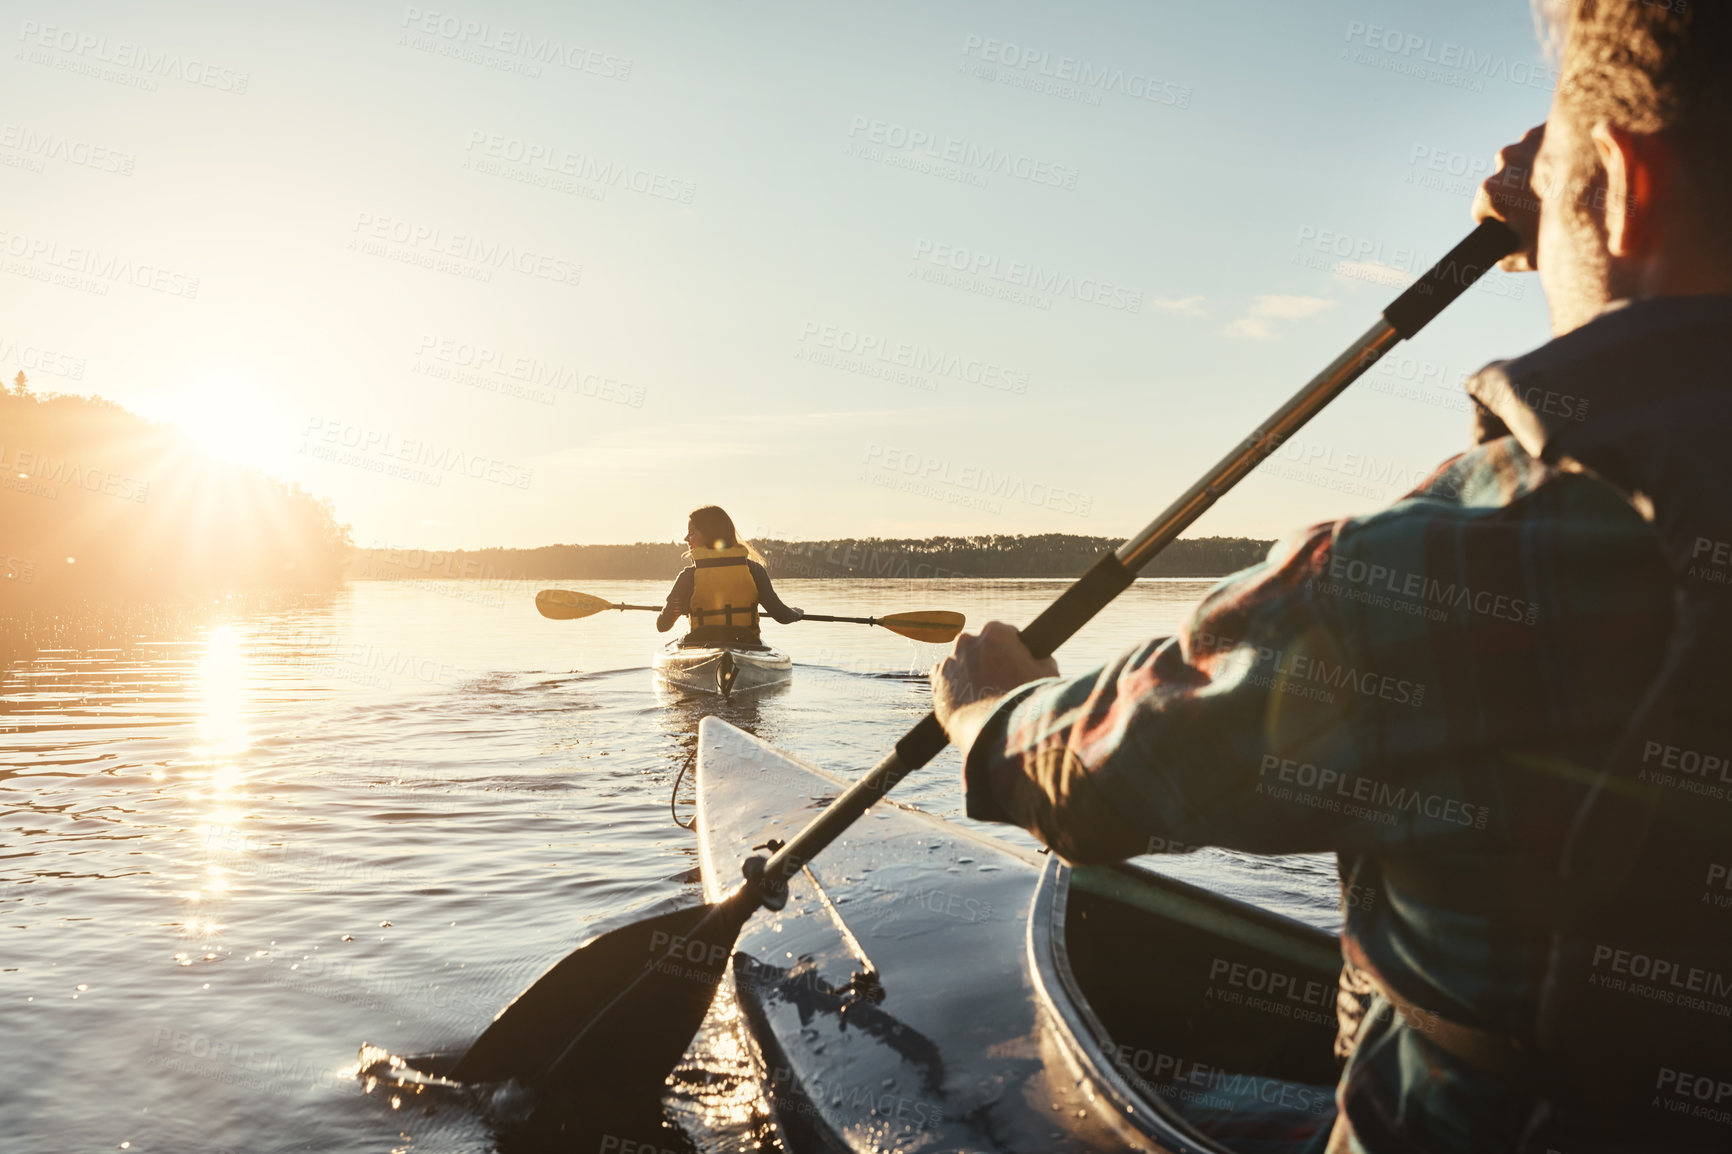 Buy stock photo Kayak, lake and people rowing a boat on the water during summer for recreation or leisure at sunset. Nature, view and horizon with people canoeing for adventure, freedom or travel while on vacation